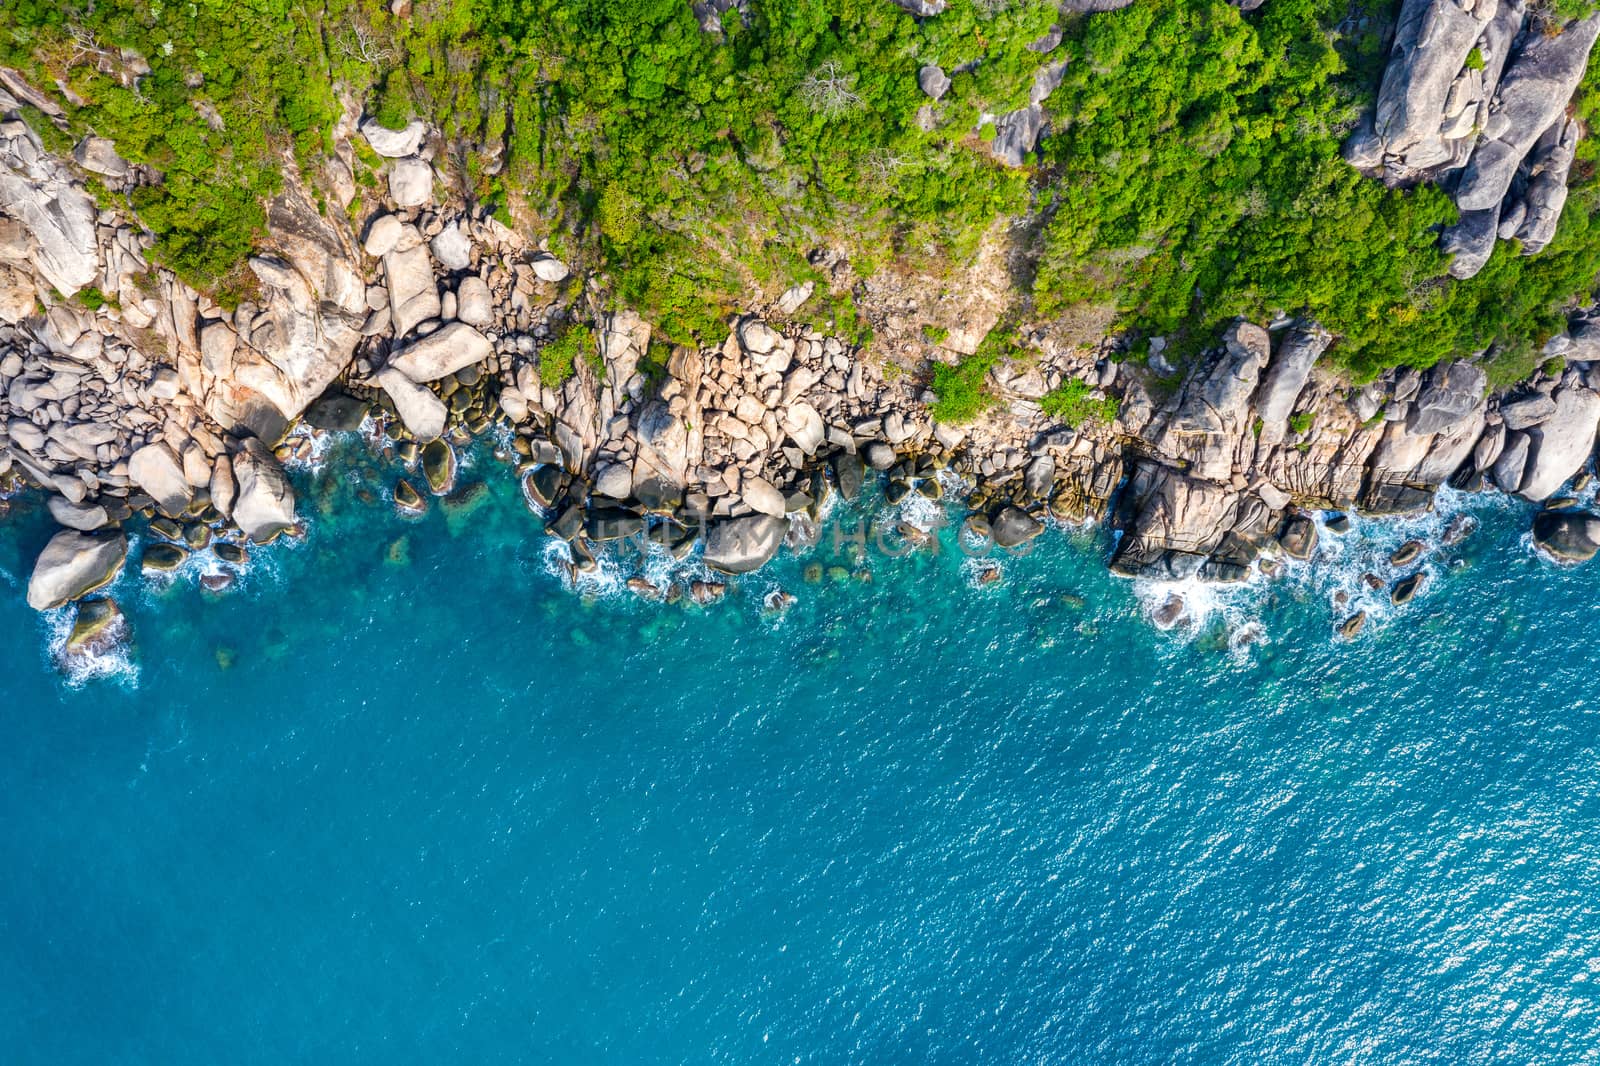 Aerial view of seashore at Koh Tao island, Thailand. by gutarphotoghaphy